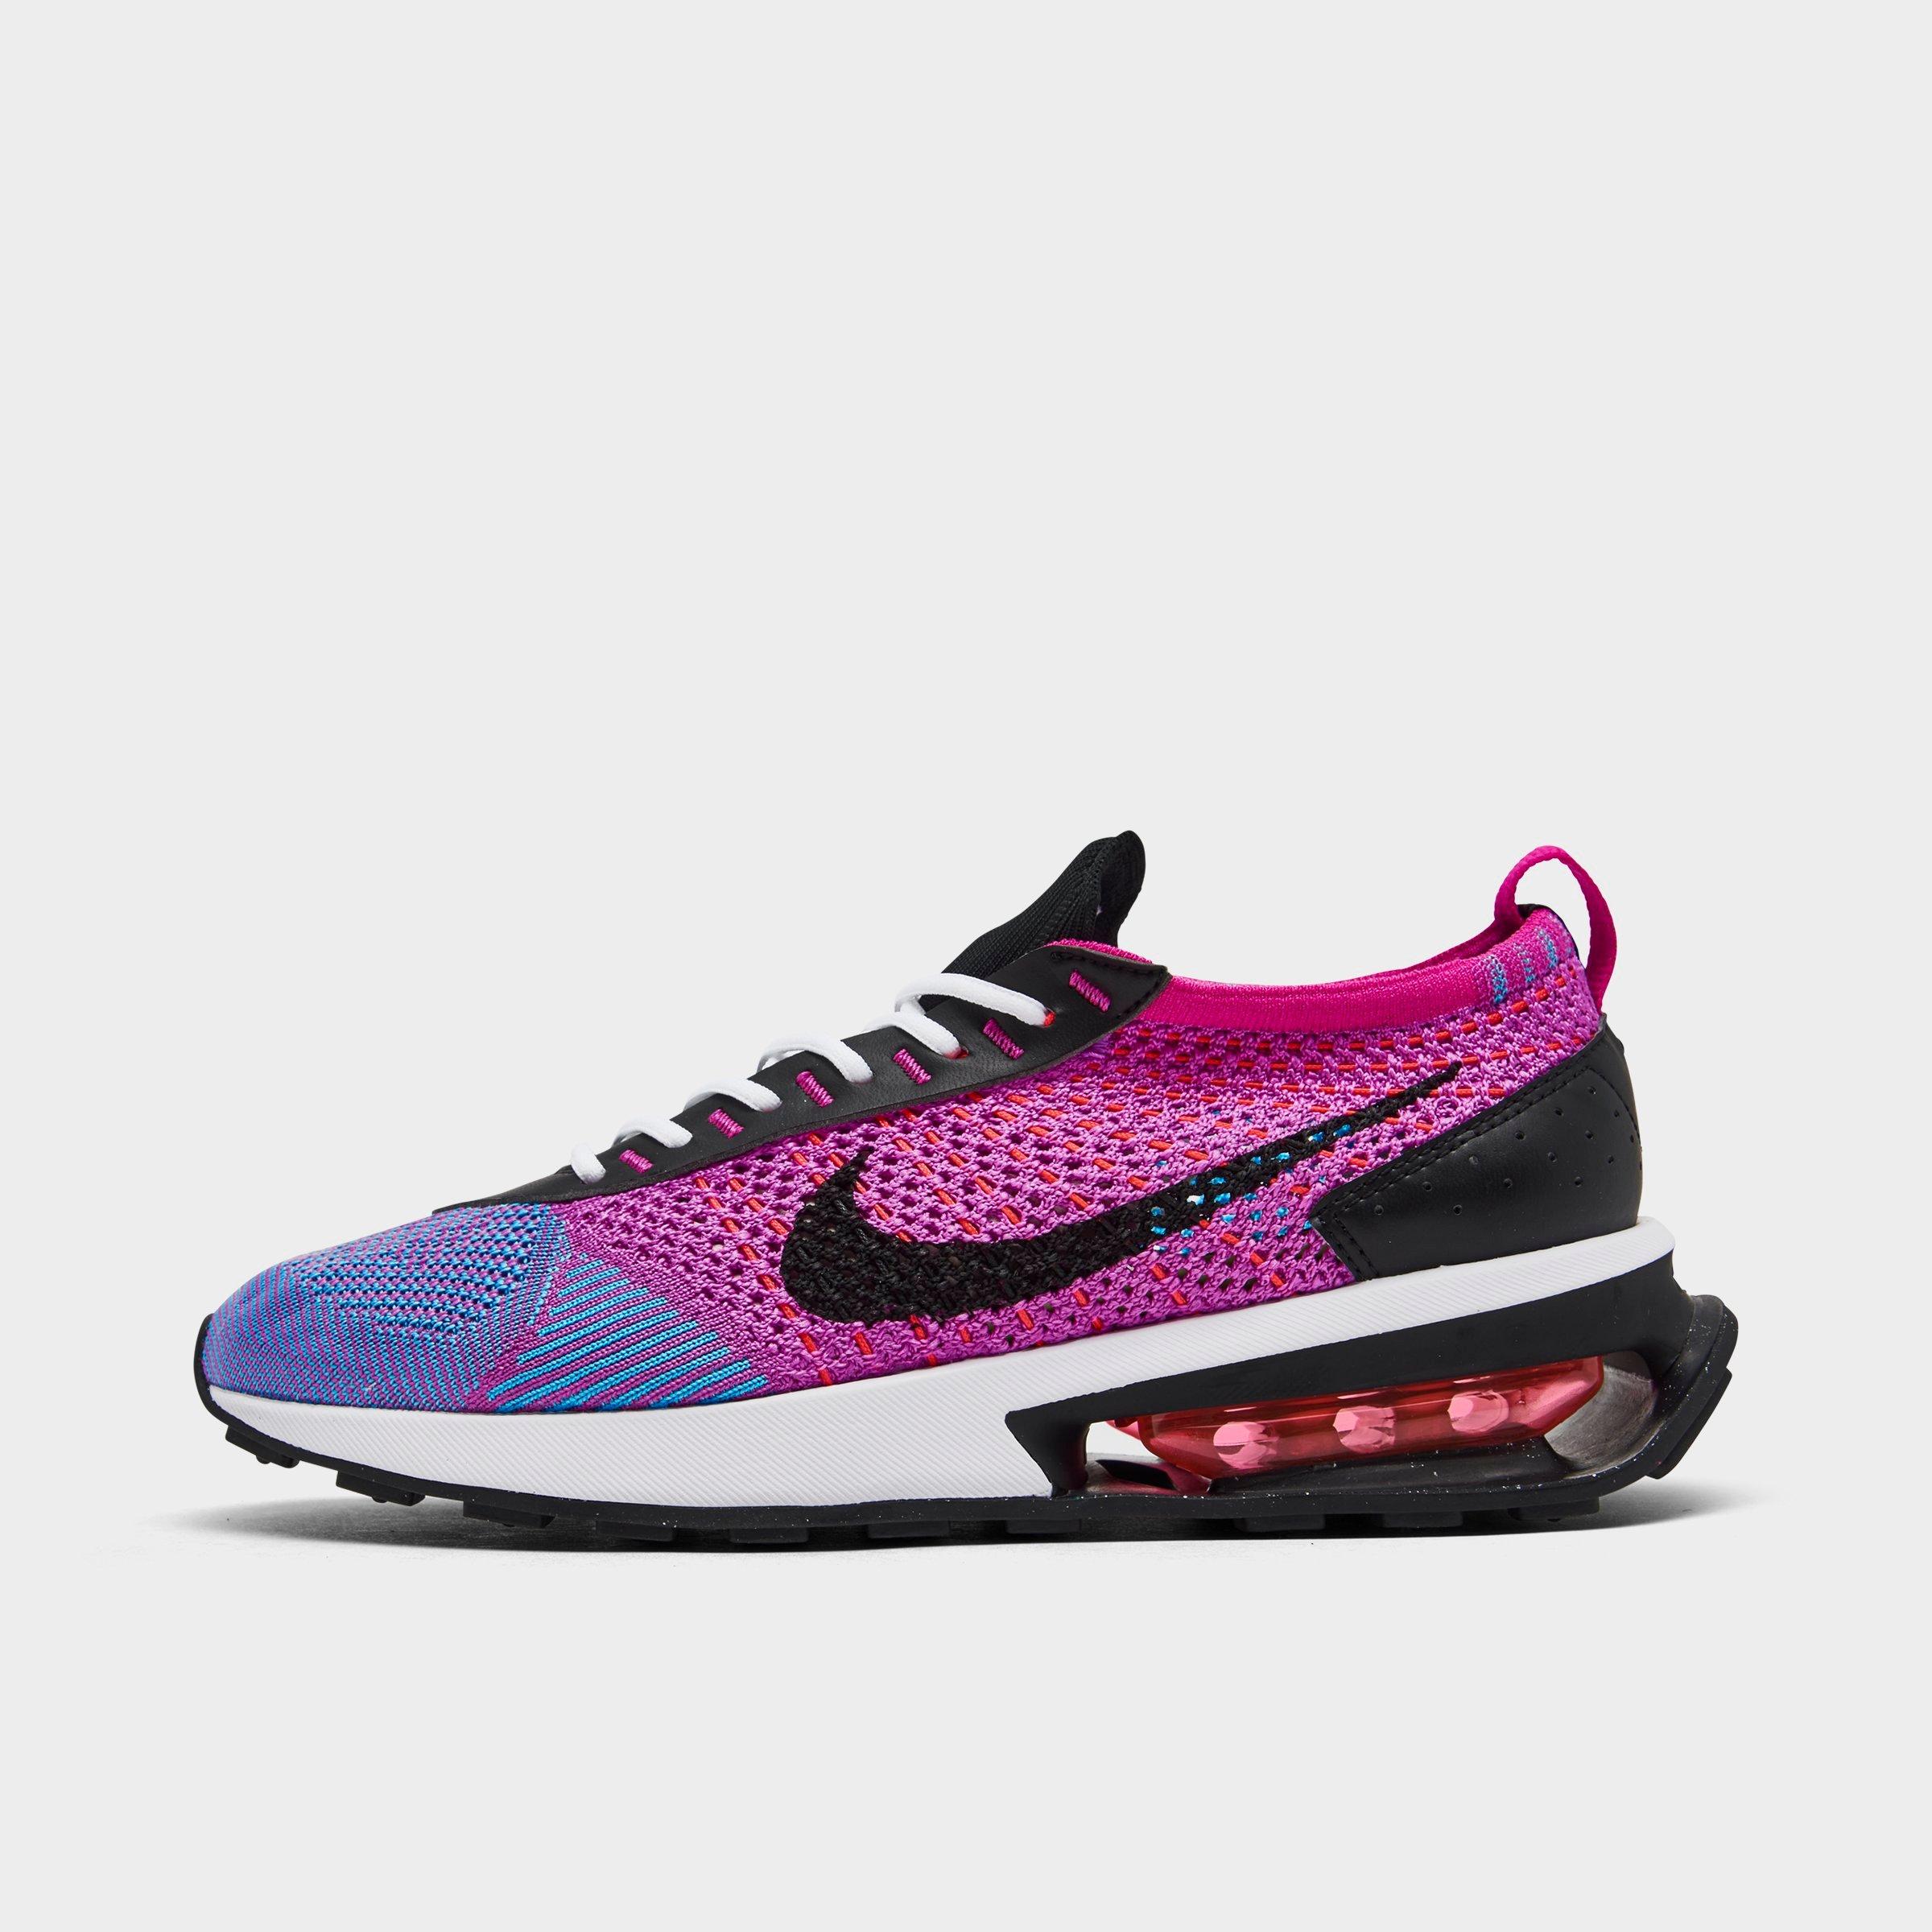 NIKE NIKE WOMEN'S AIR MAX FLYKNIT RACER CASUAL SHOES